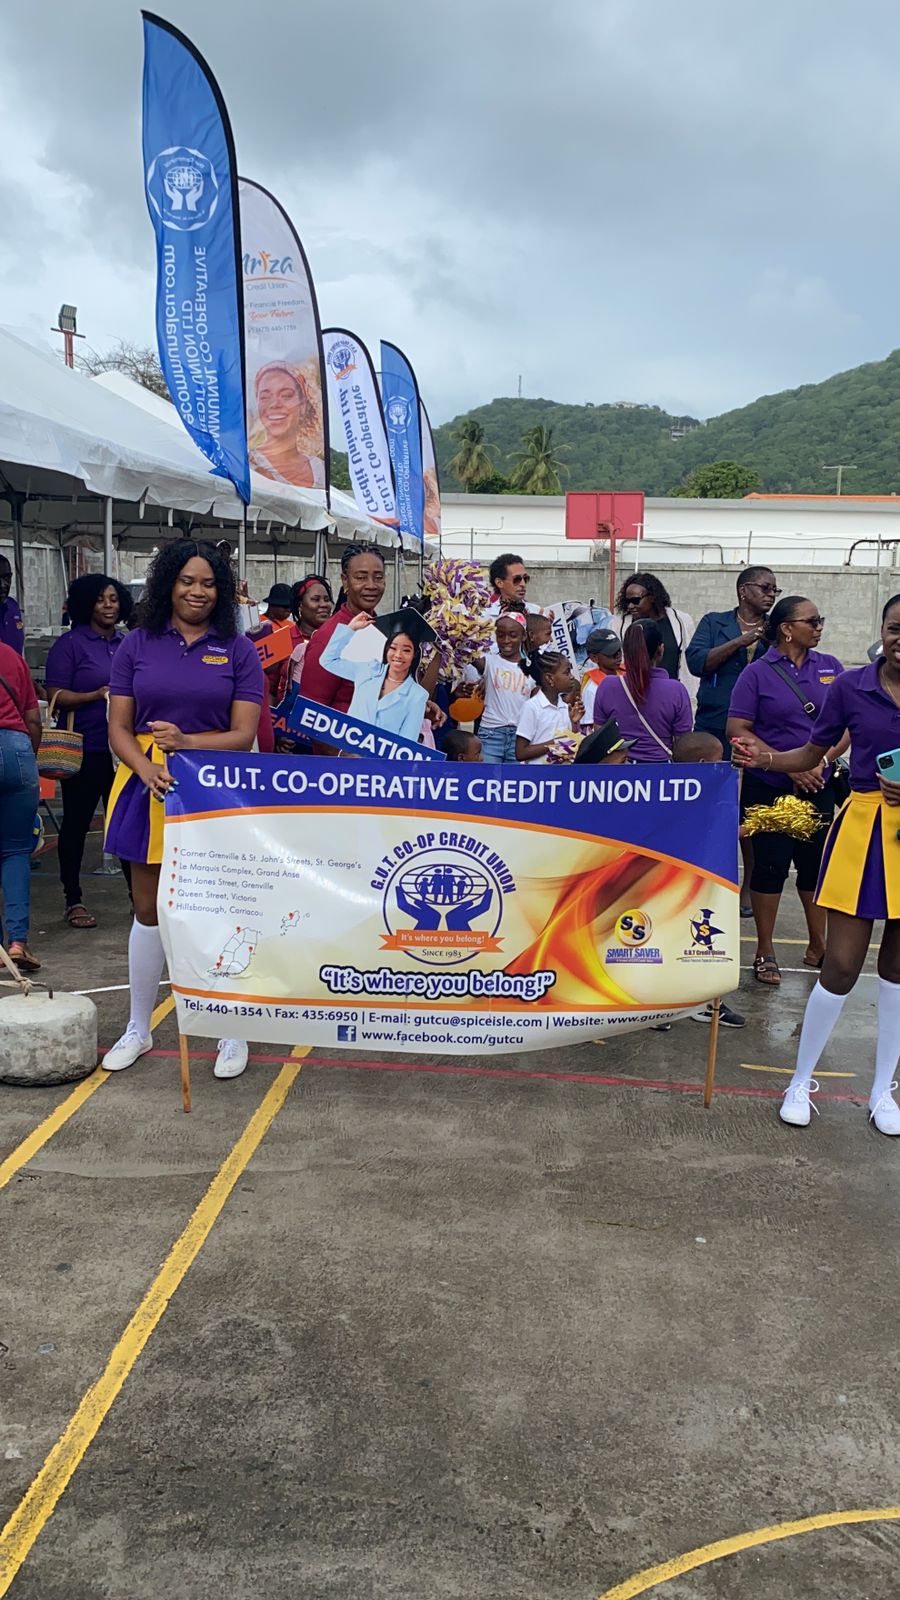 Credit Union Day 2022 celebrations Carriacou (Oct. 2022)